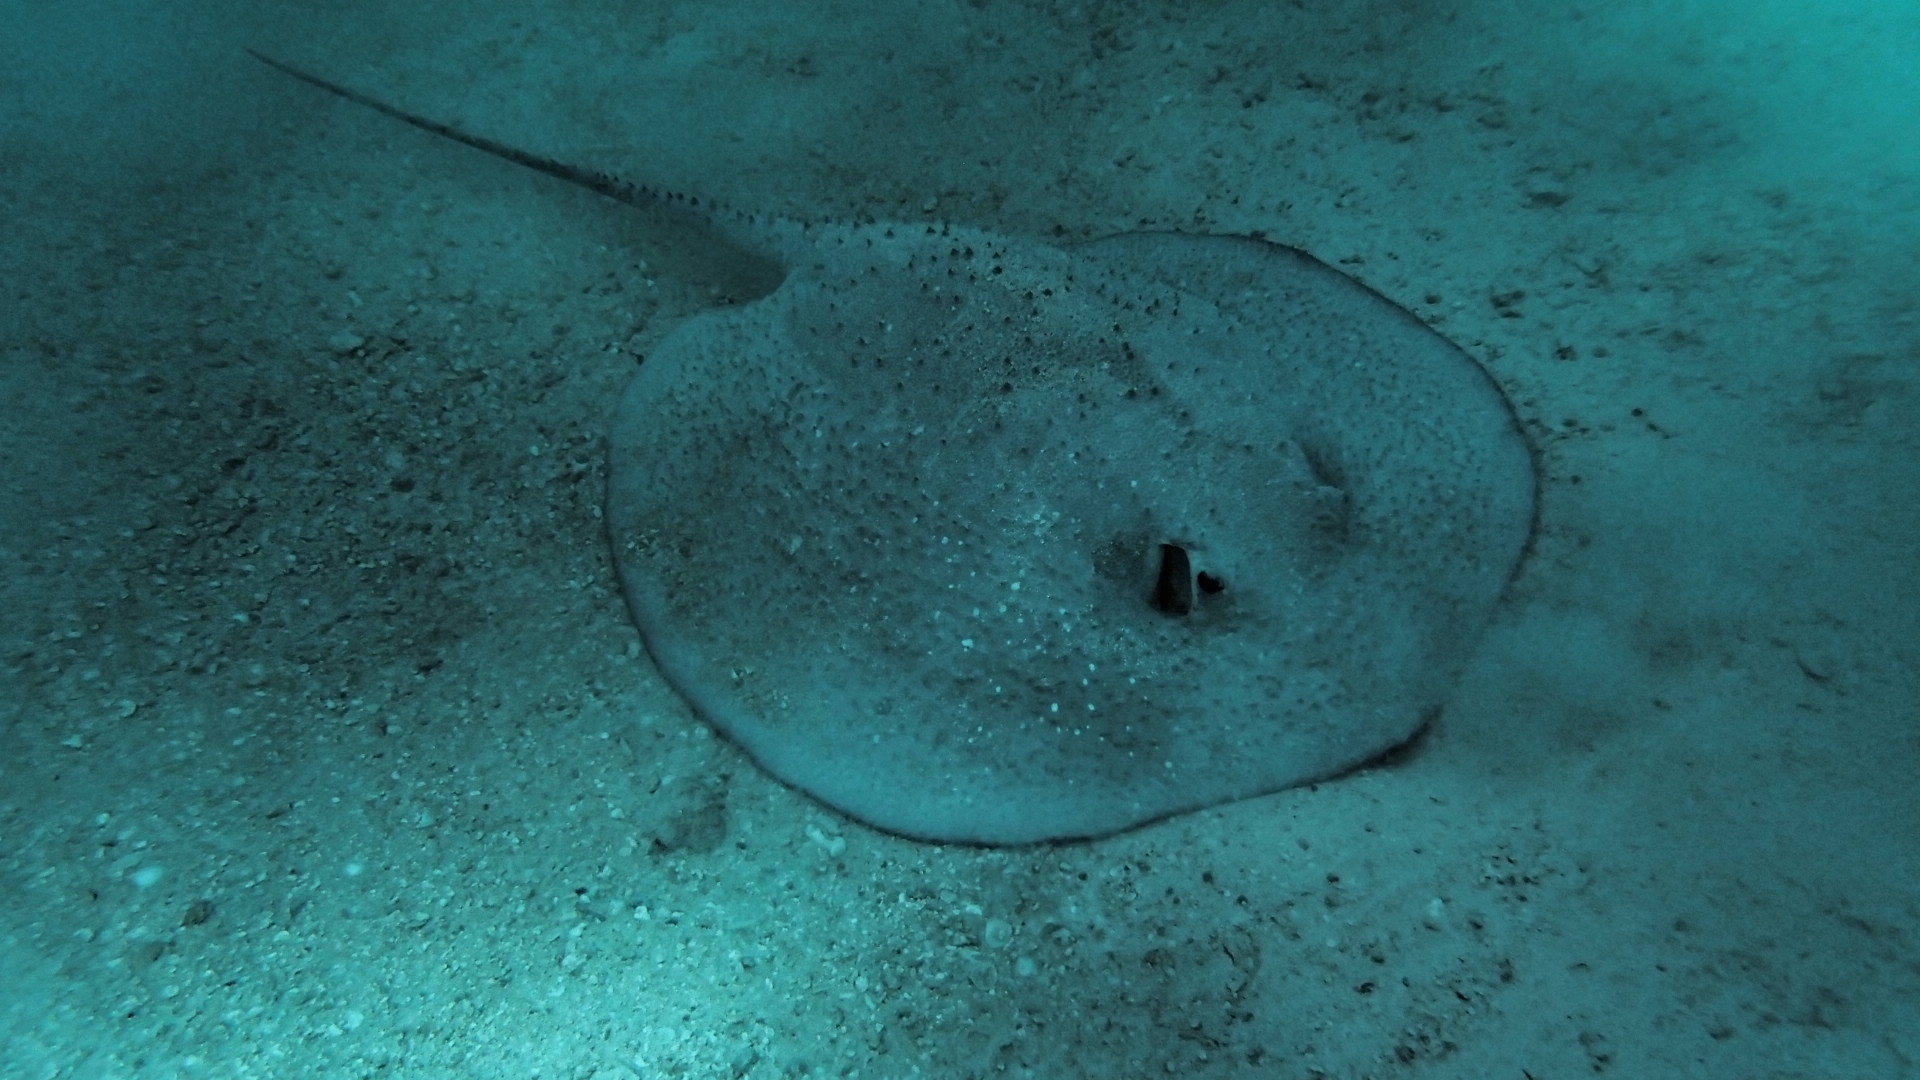  Day five: finally, a porcupine ray is captured on a BRUV! Days six and seven were filled with more porcupine ray encounters; all the rays were large and powerful animals, up to 1.5 m across the disc 